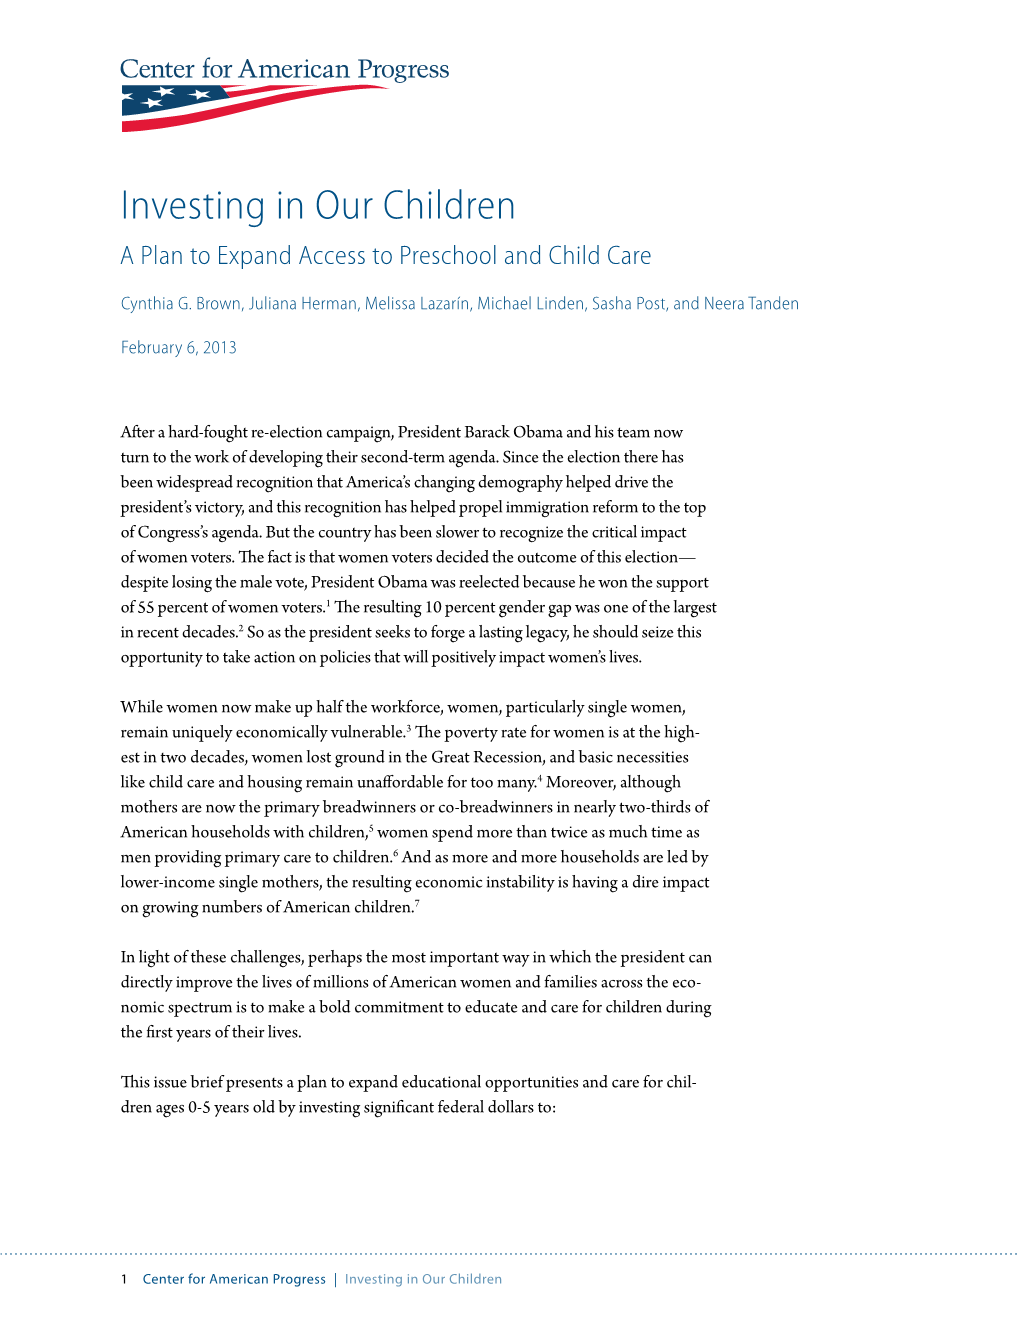 Investing in Our Children a Plan to Expand Access to Preschool and Child Care